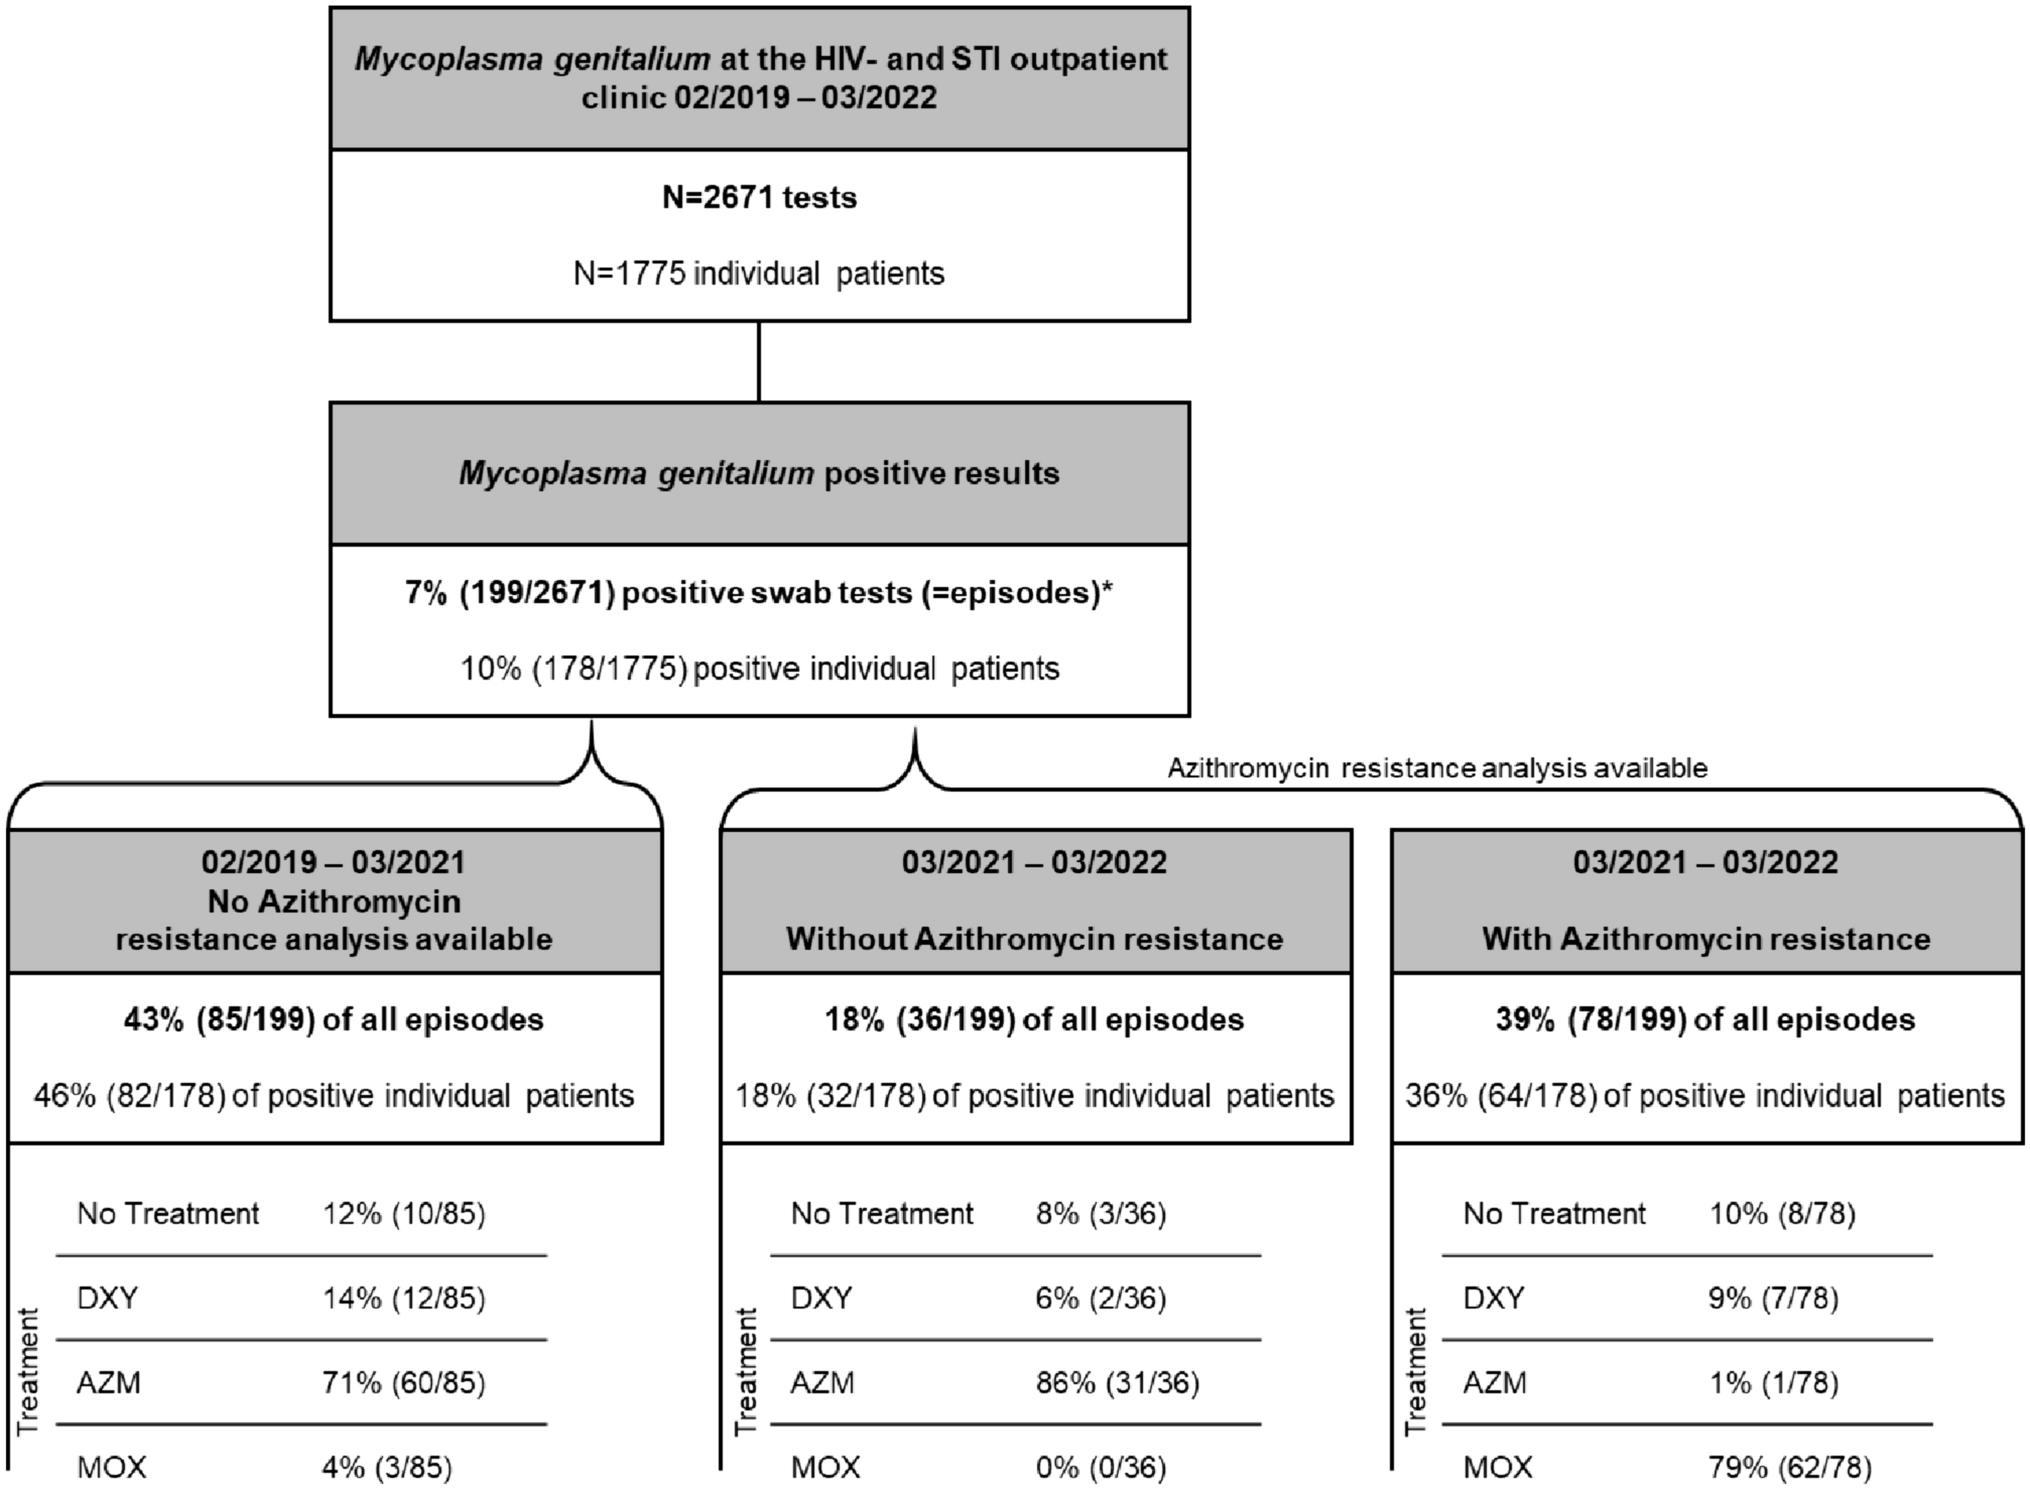 High cure rates of Mycoplasma genitalium following empiric treatment with azithromycin alongside frequent detection of macrolide resistance in Austria